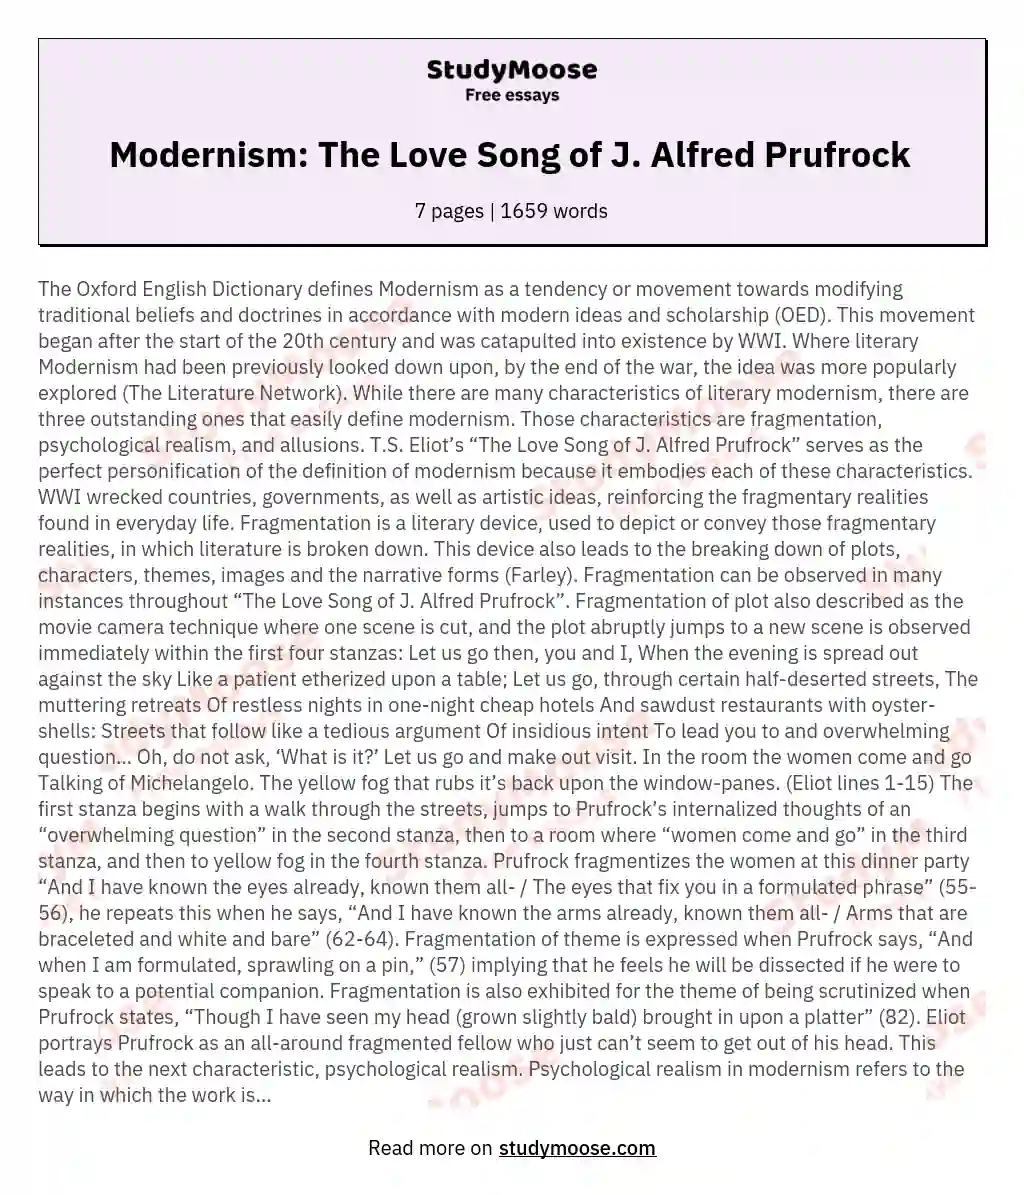 Modernism: The Love Song of J. Alfred Prufrock 